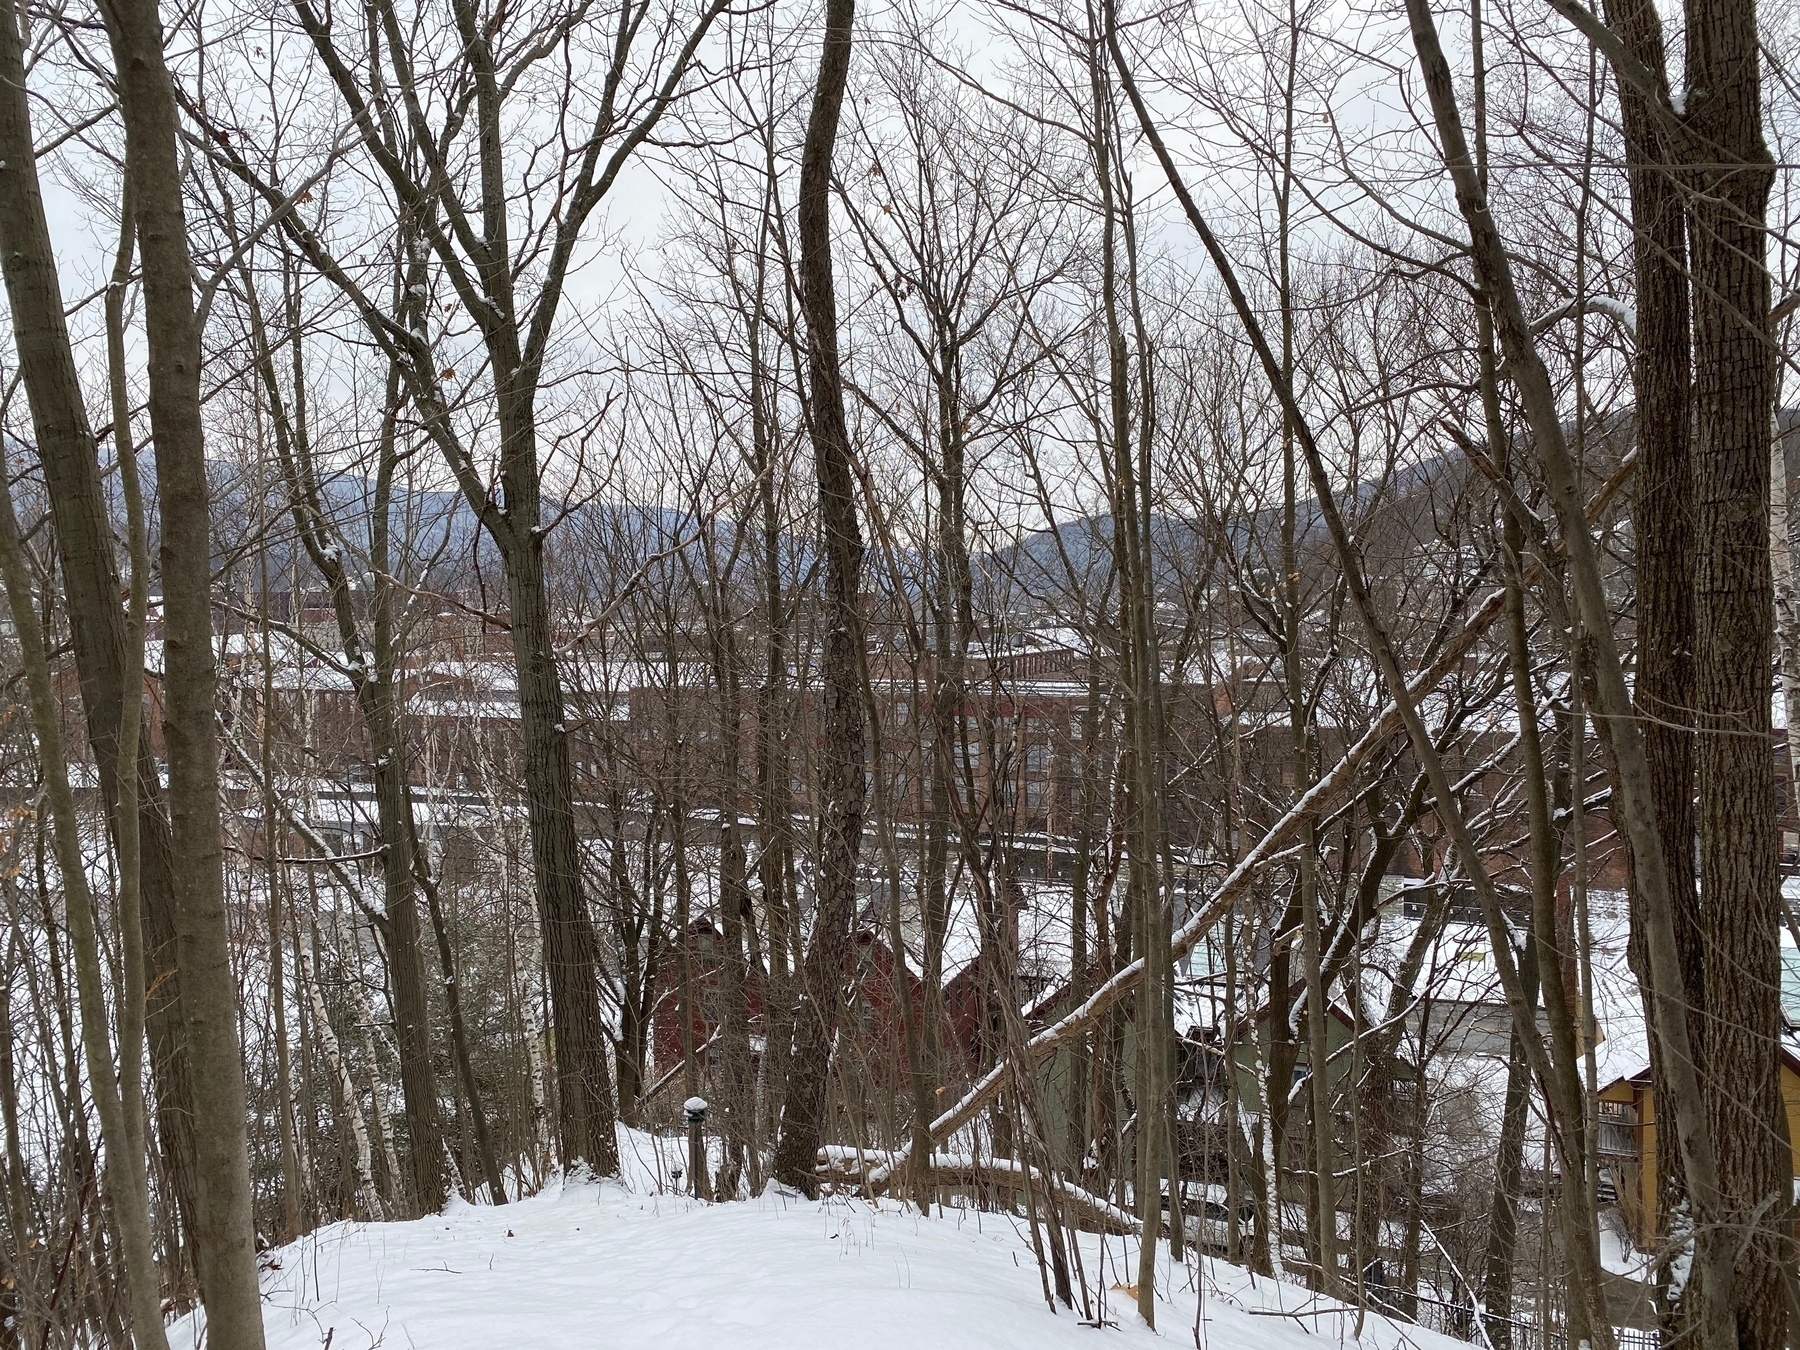 View of large buildings behind a screen of leafless tress, with snow on the ground and a gray sky above.